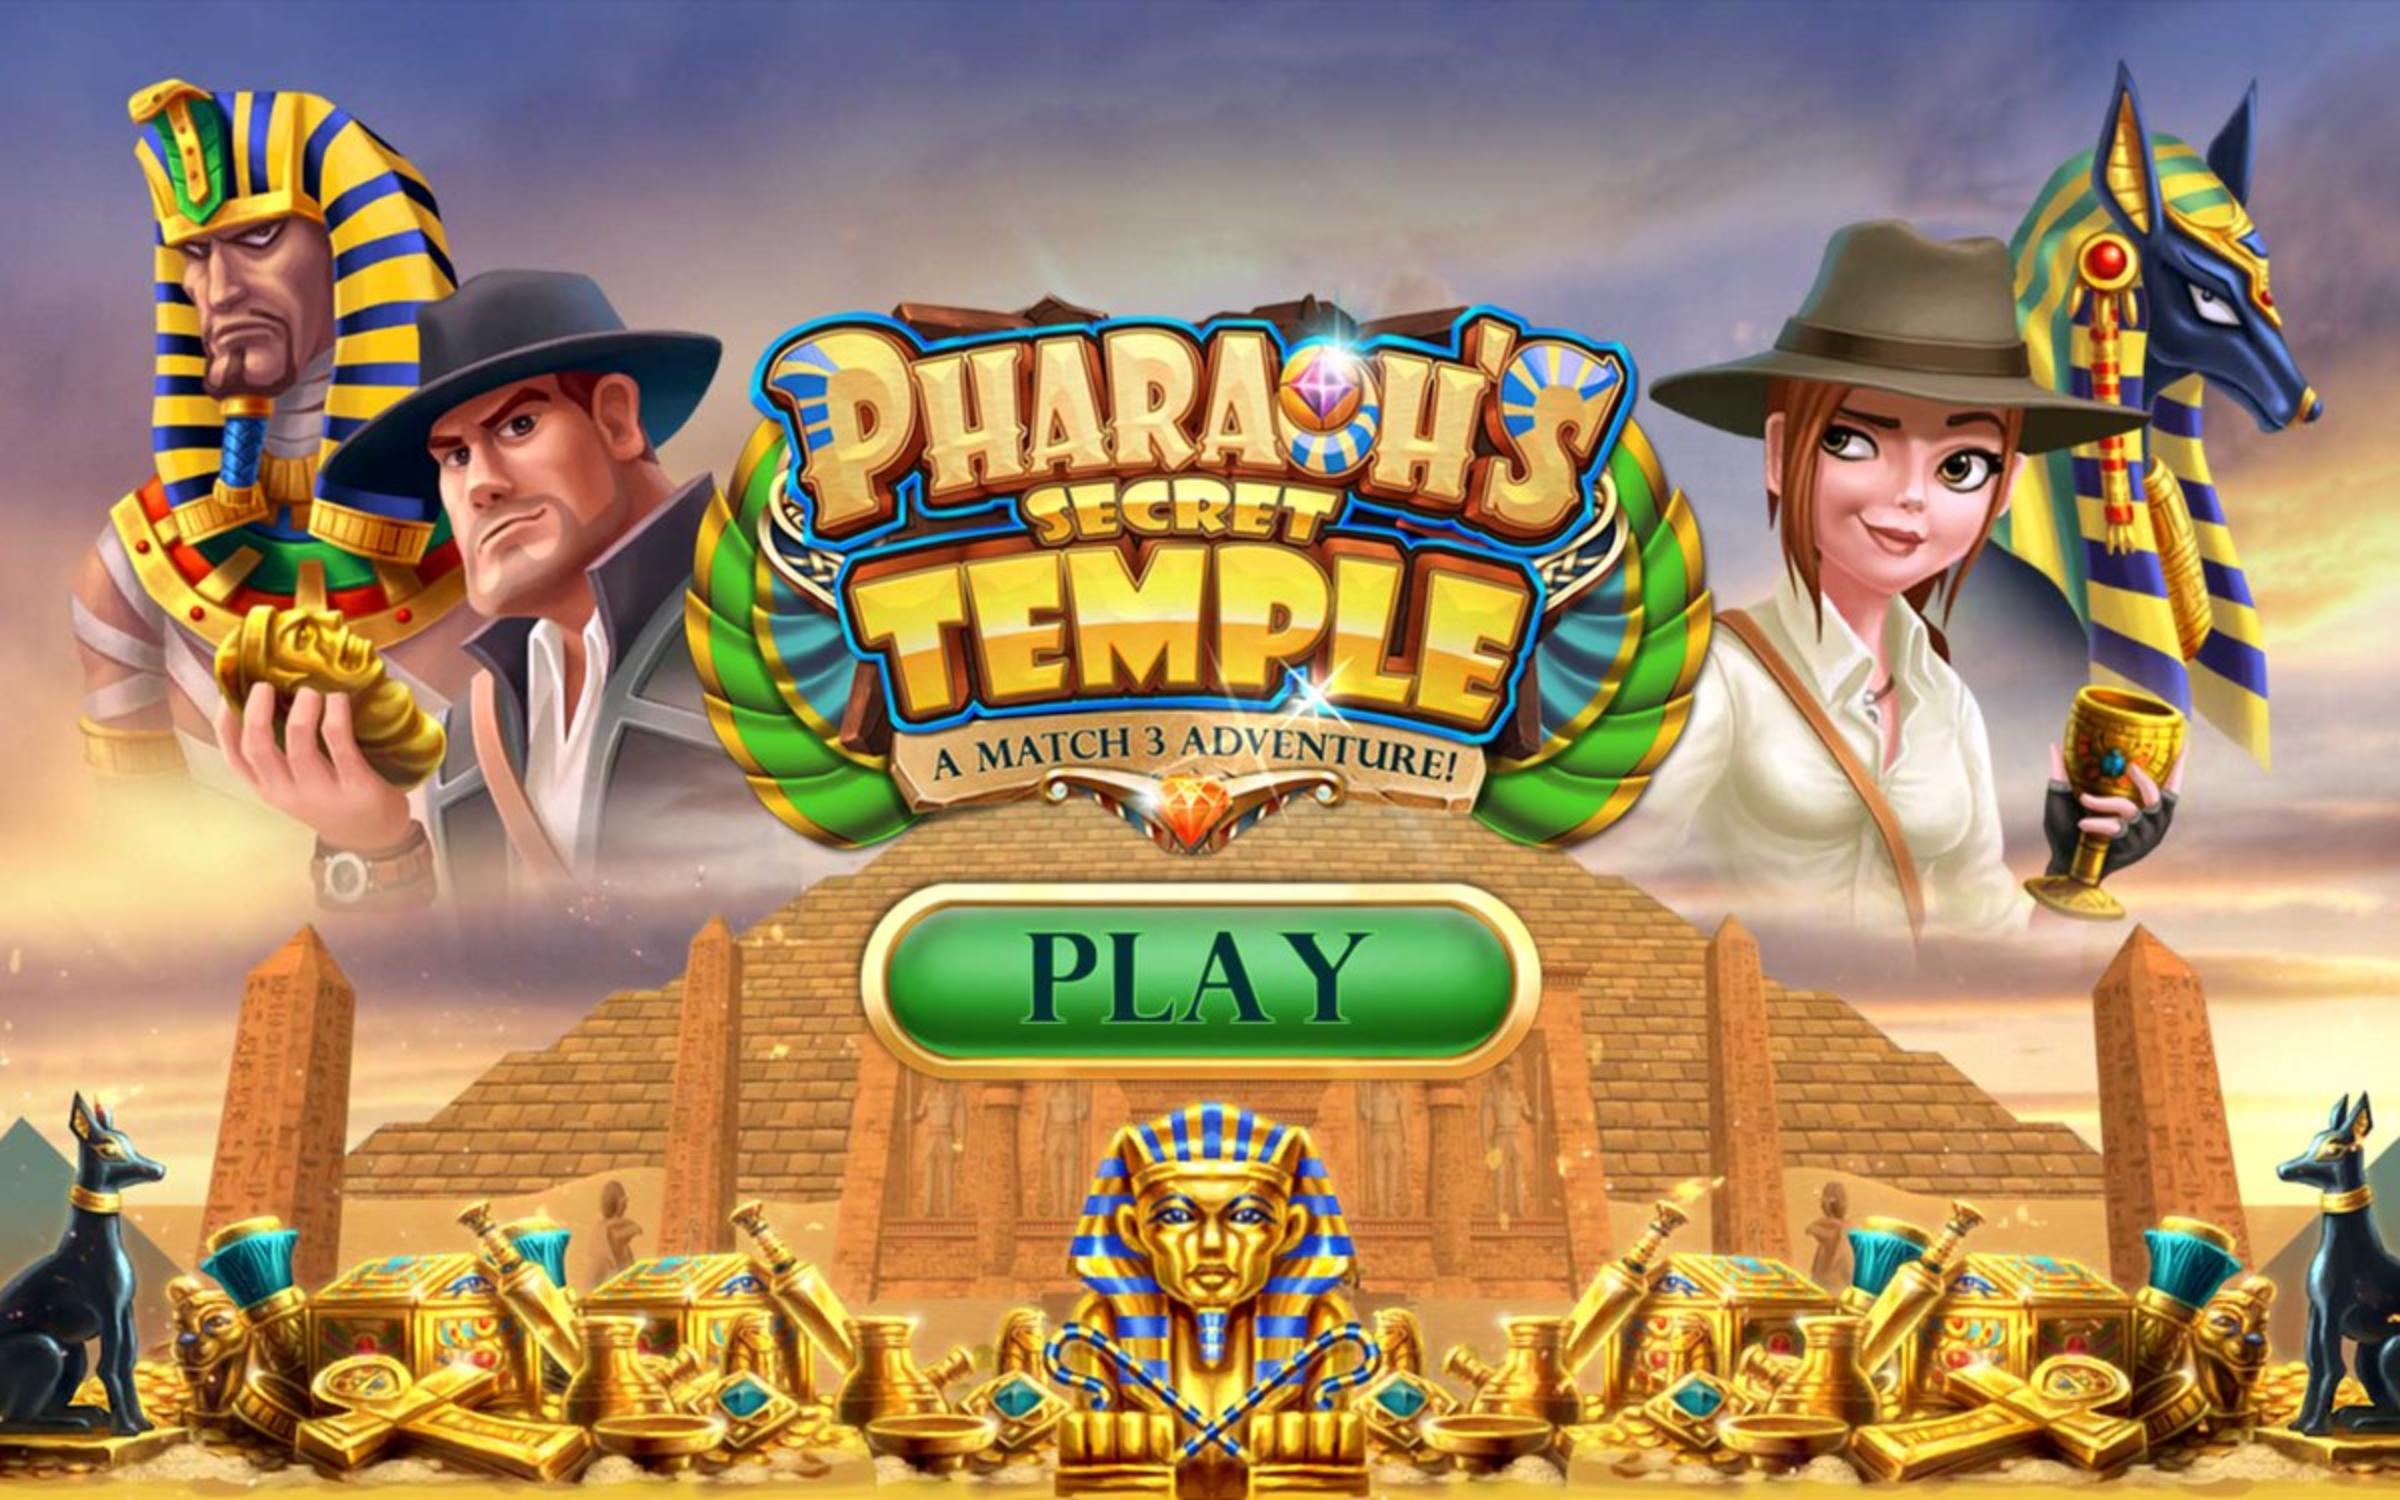 The Pharaohs Secret Temple Online Slot Demo Game by Pirates Gold Studios